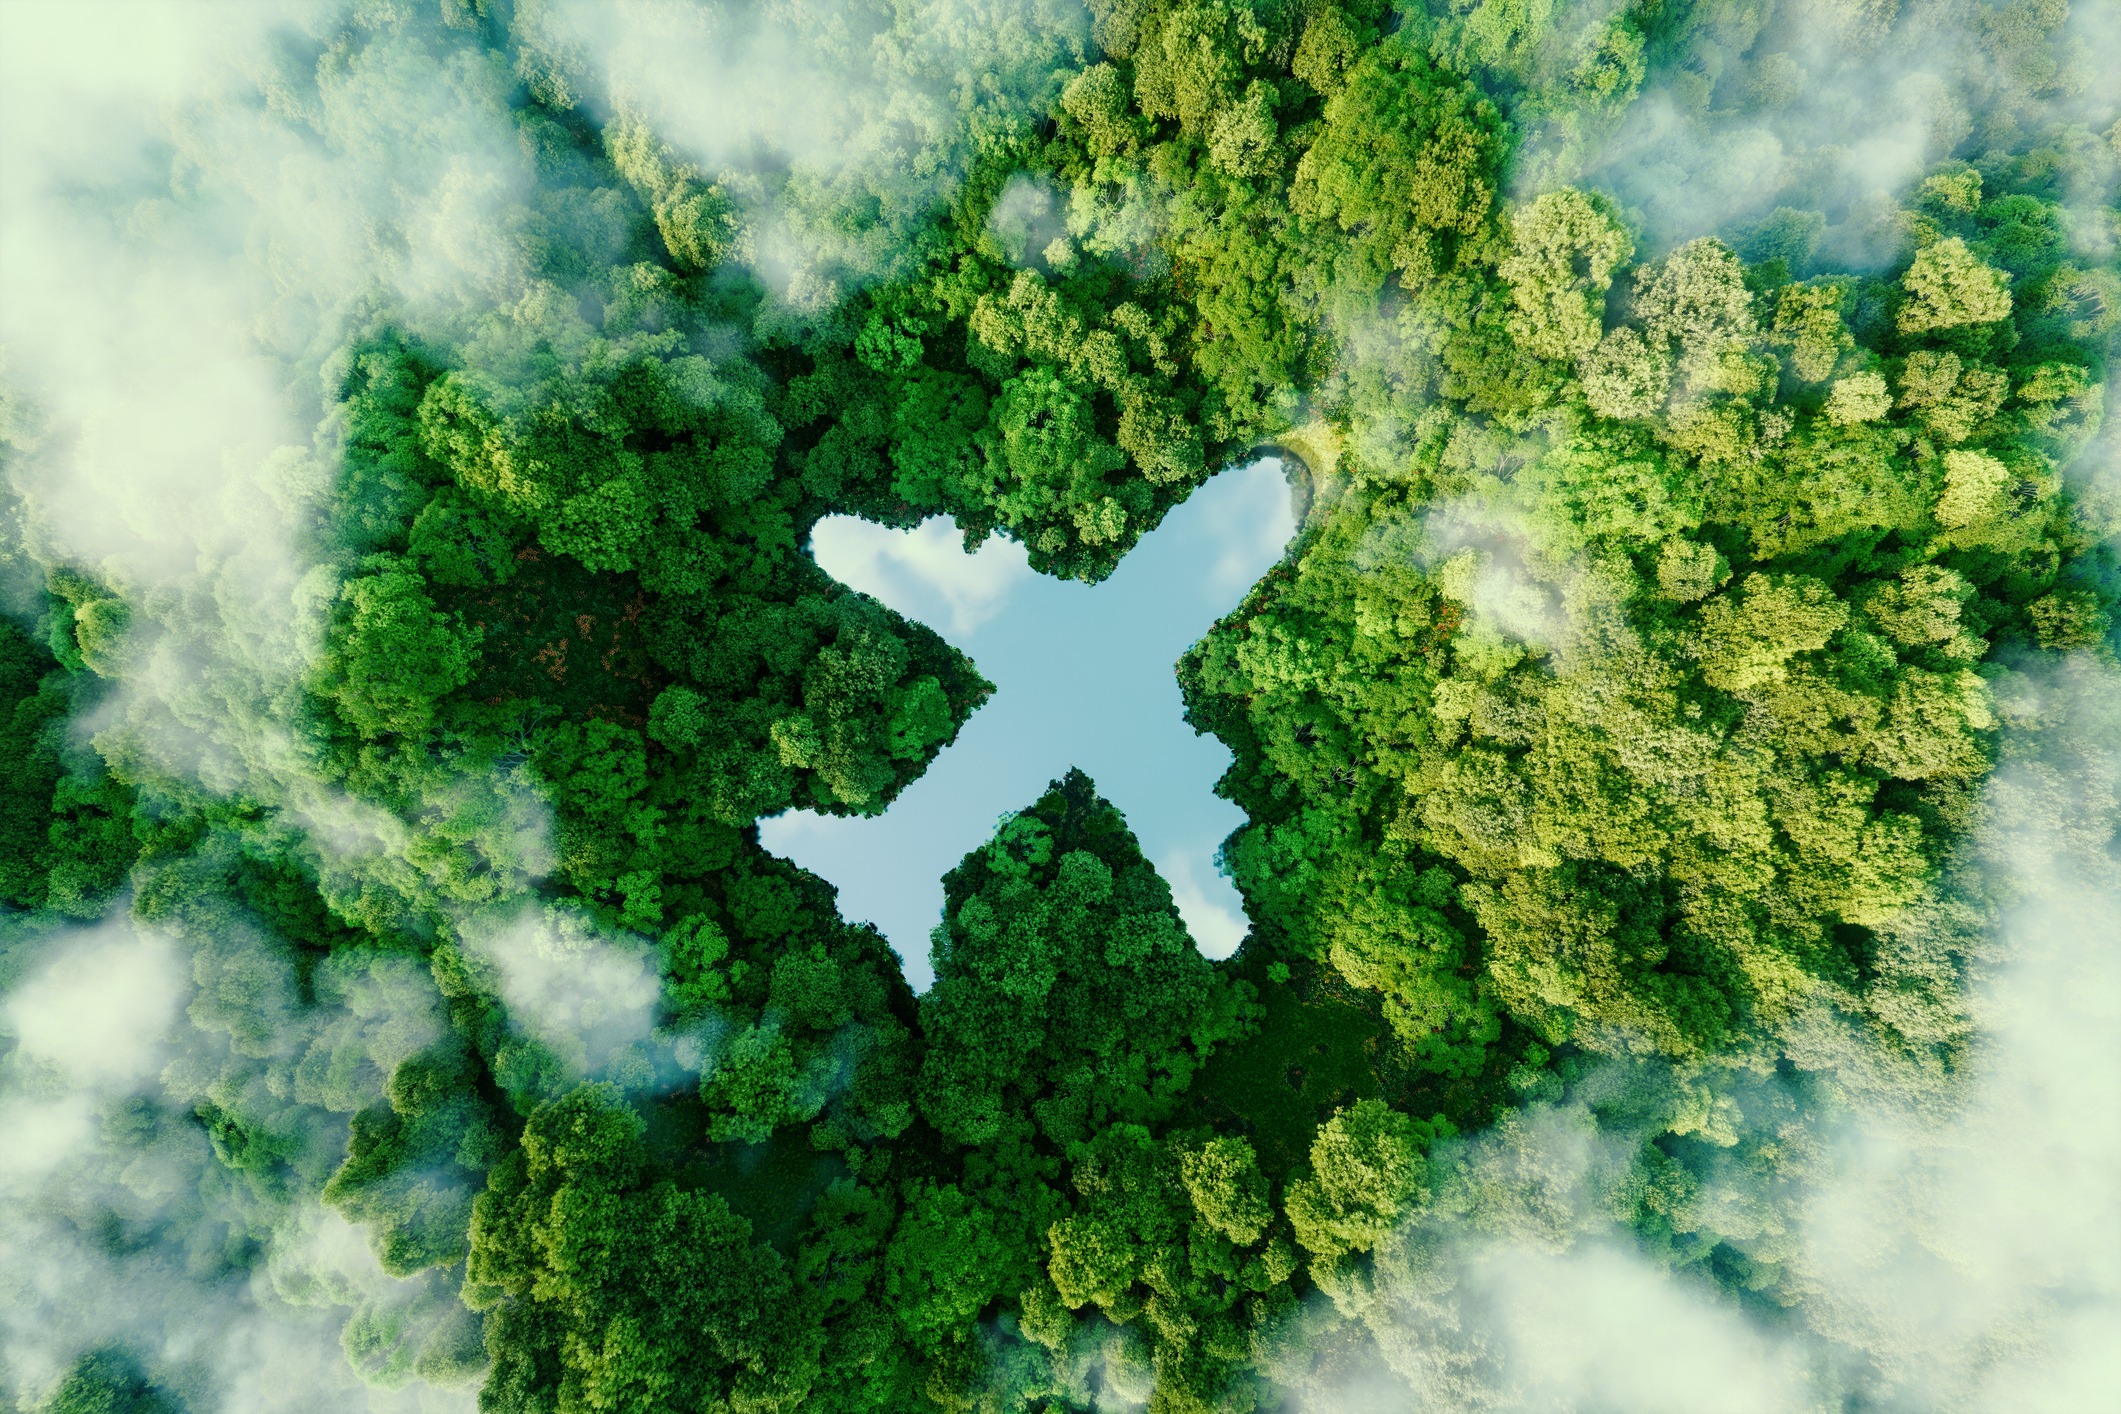 An airplane-shaped lake in the middle of a forest. Sustainable travel helps limit carbon emissions and waste.